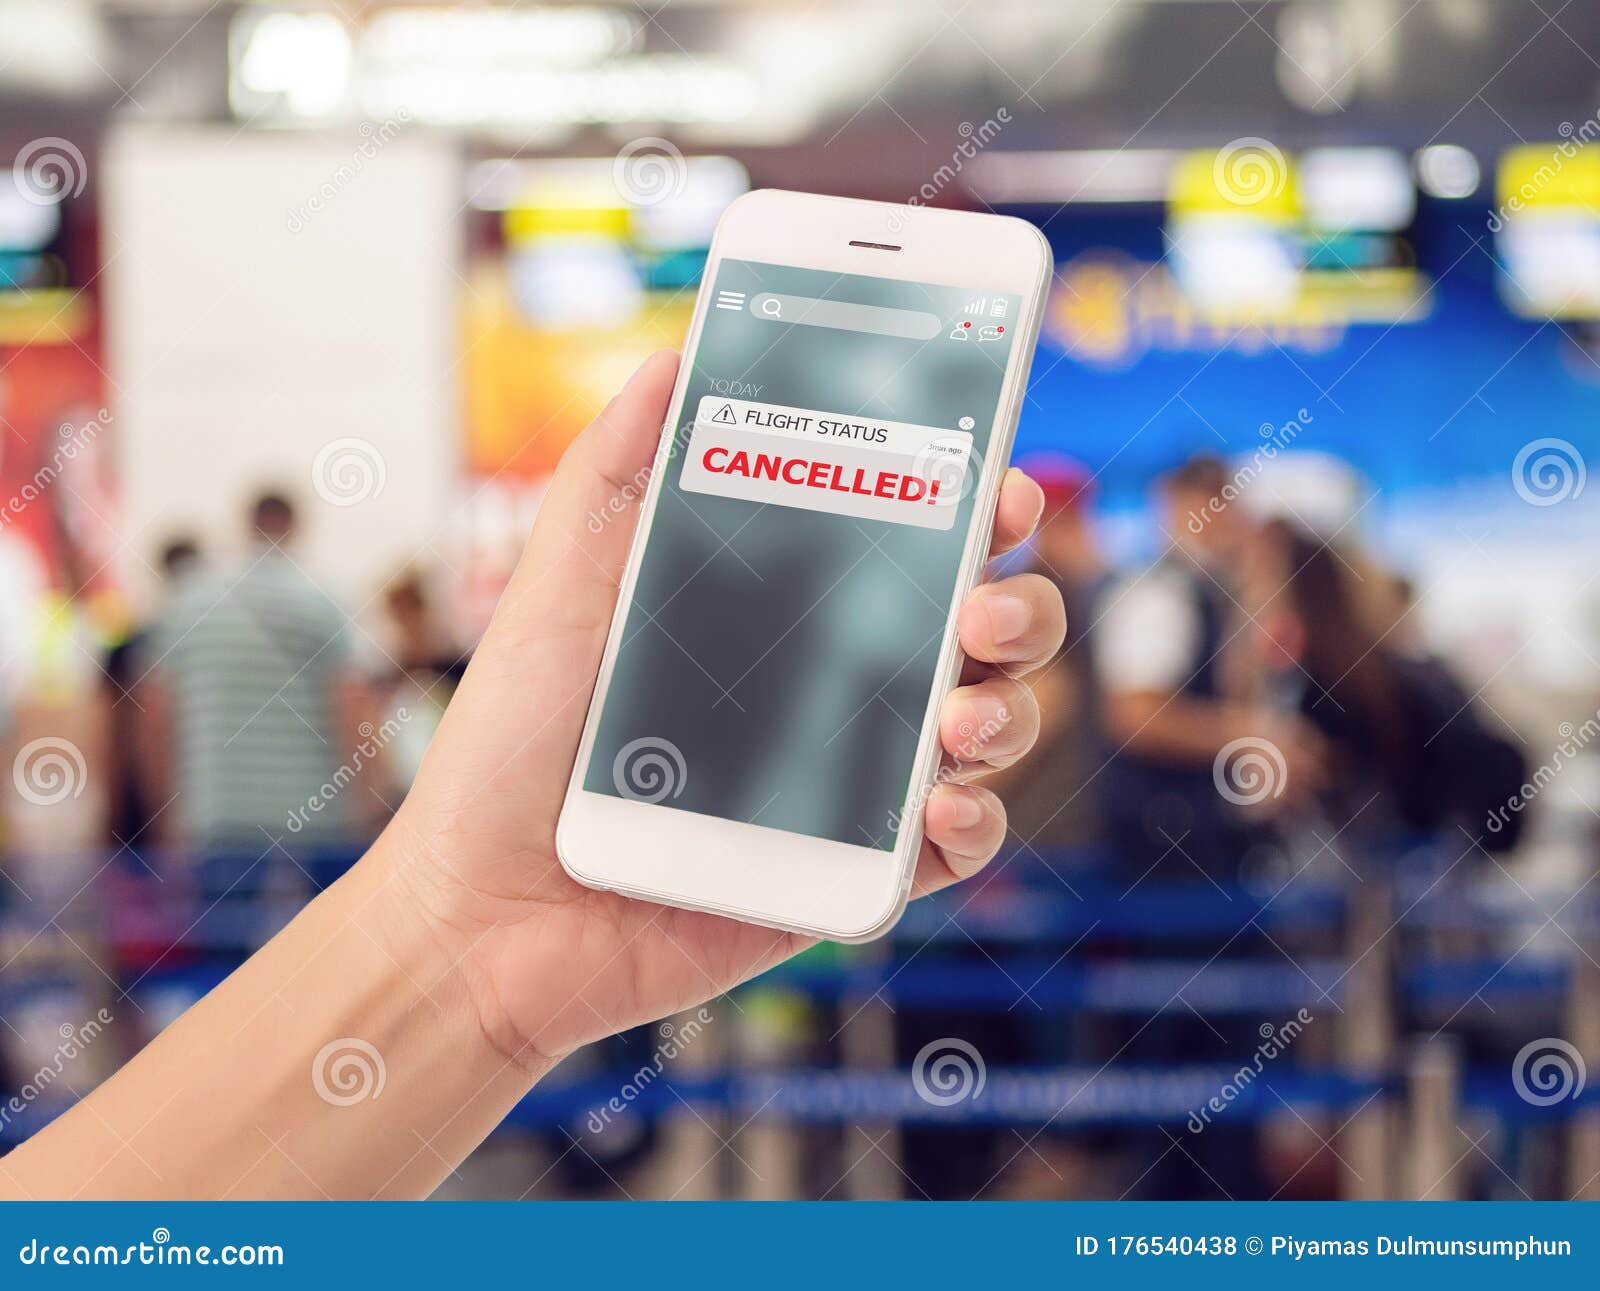 cancellation flight from FLG to BDL by phone